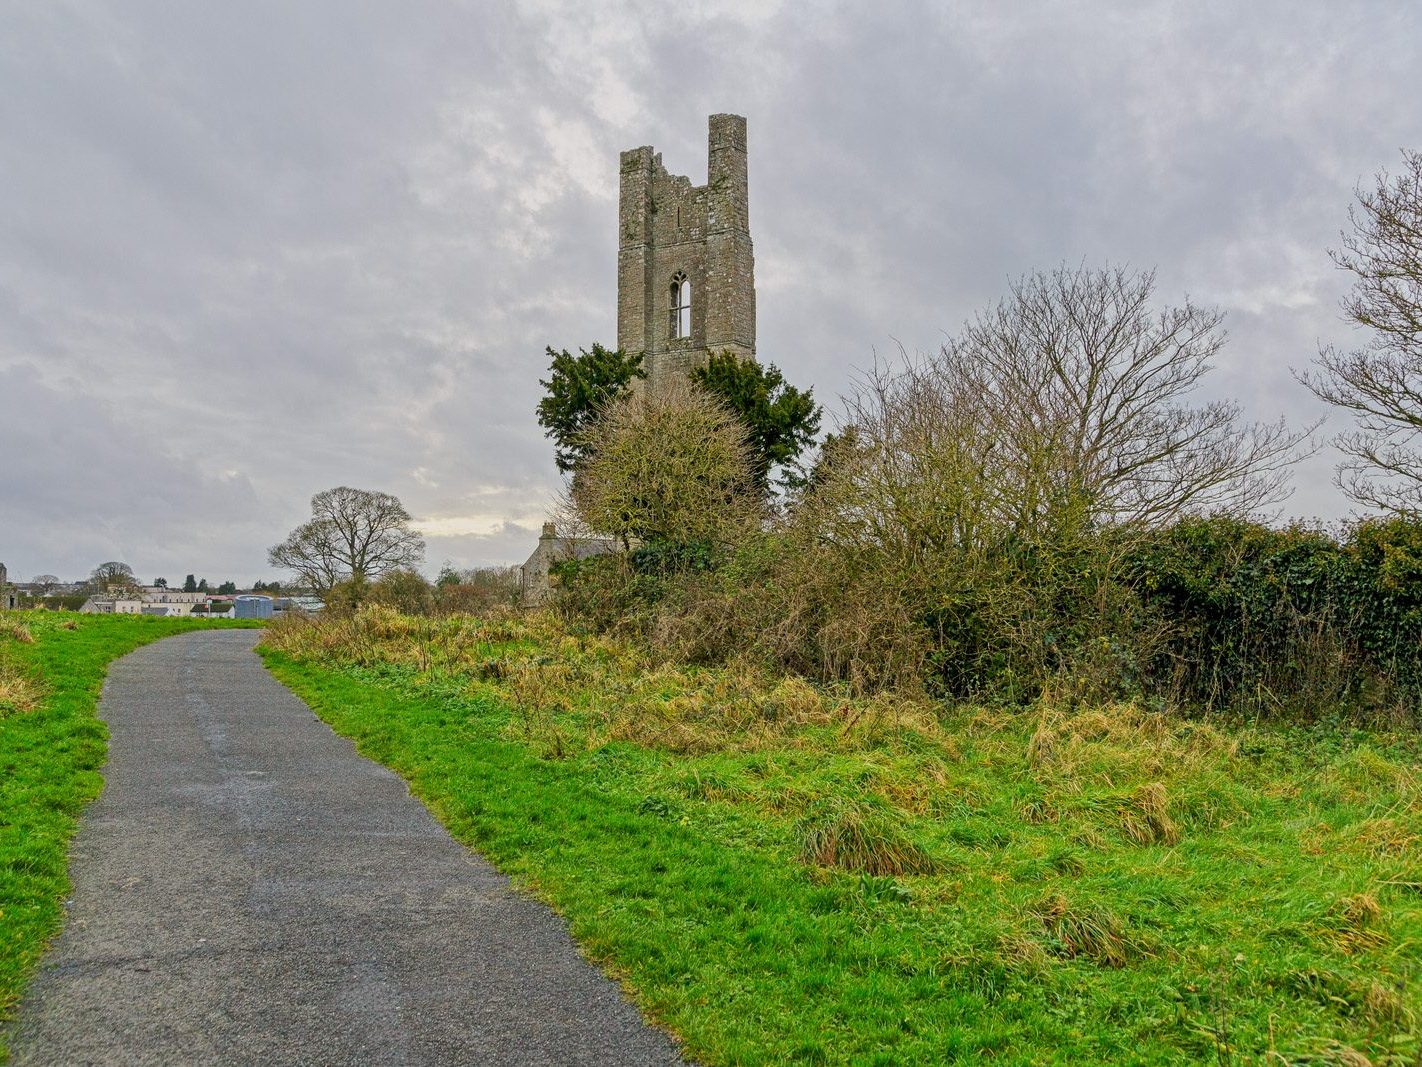 THE YELLOW STEEPLE DOMINATES THE TOWN OF TRIM [ALSO KNOWN AS ST MARYS ABBEY]-226746-1